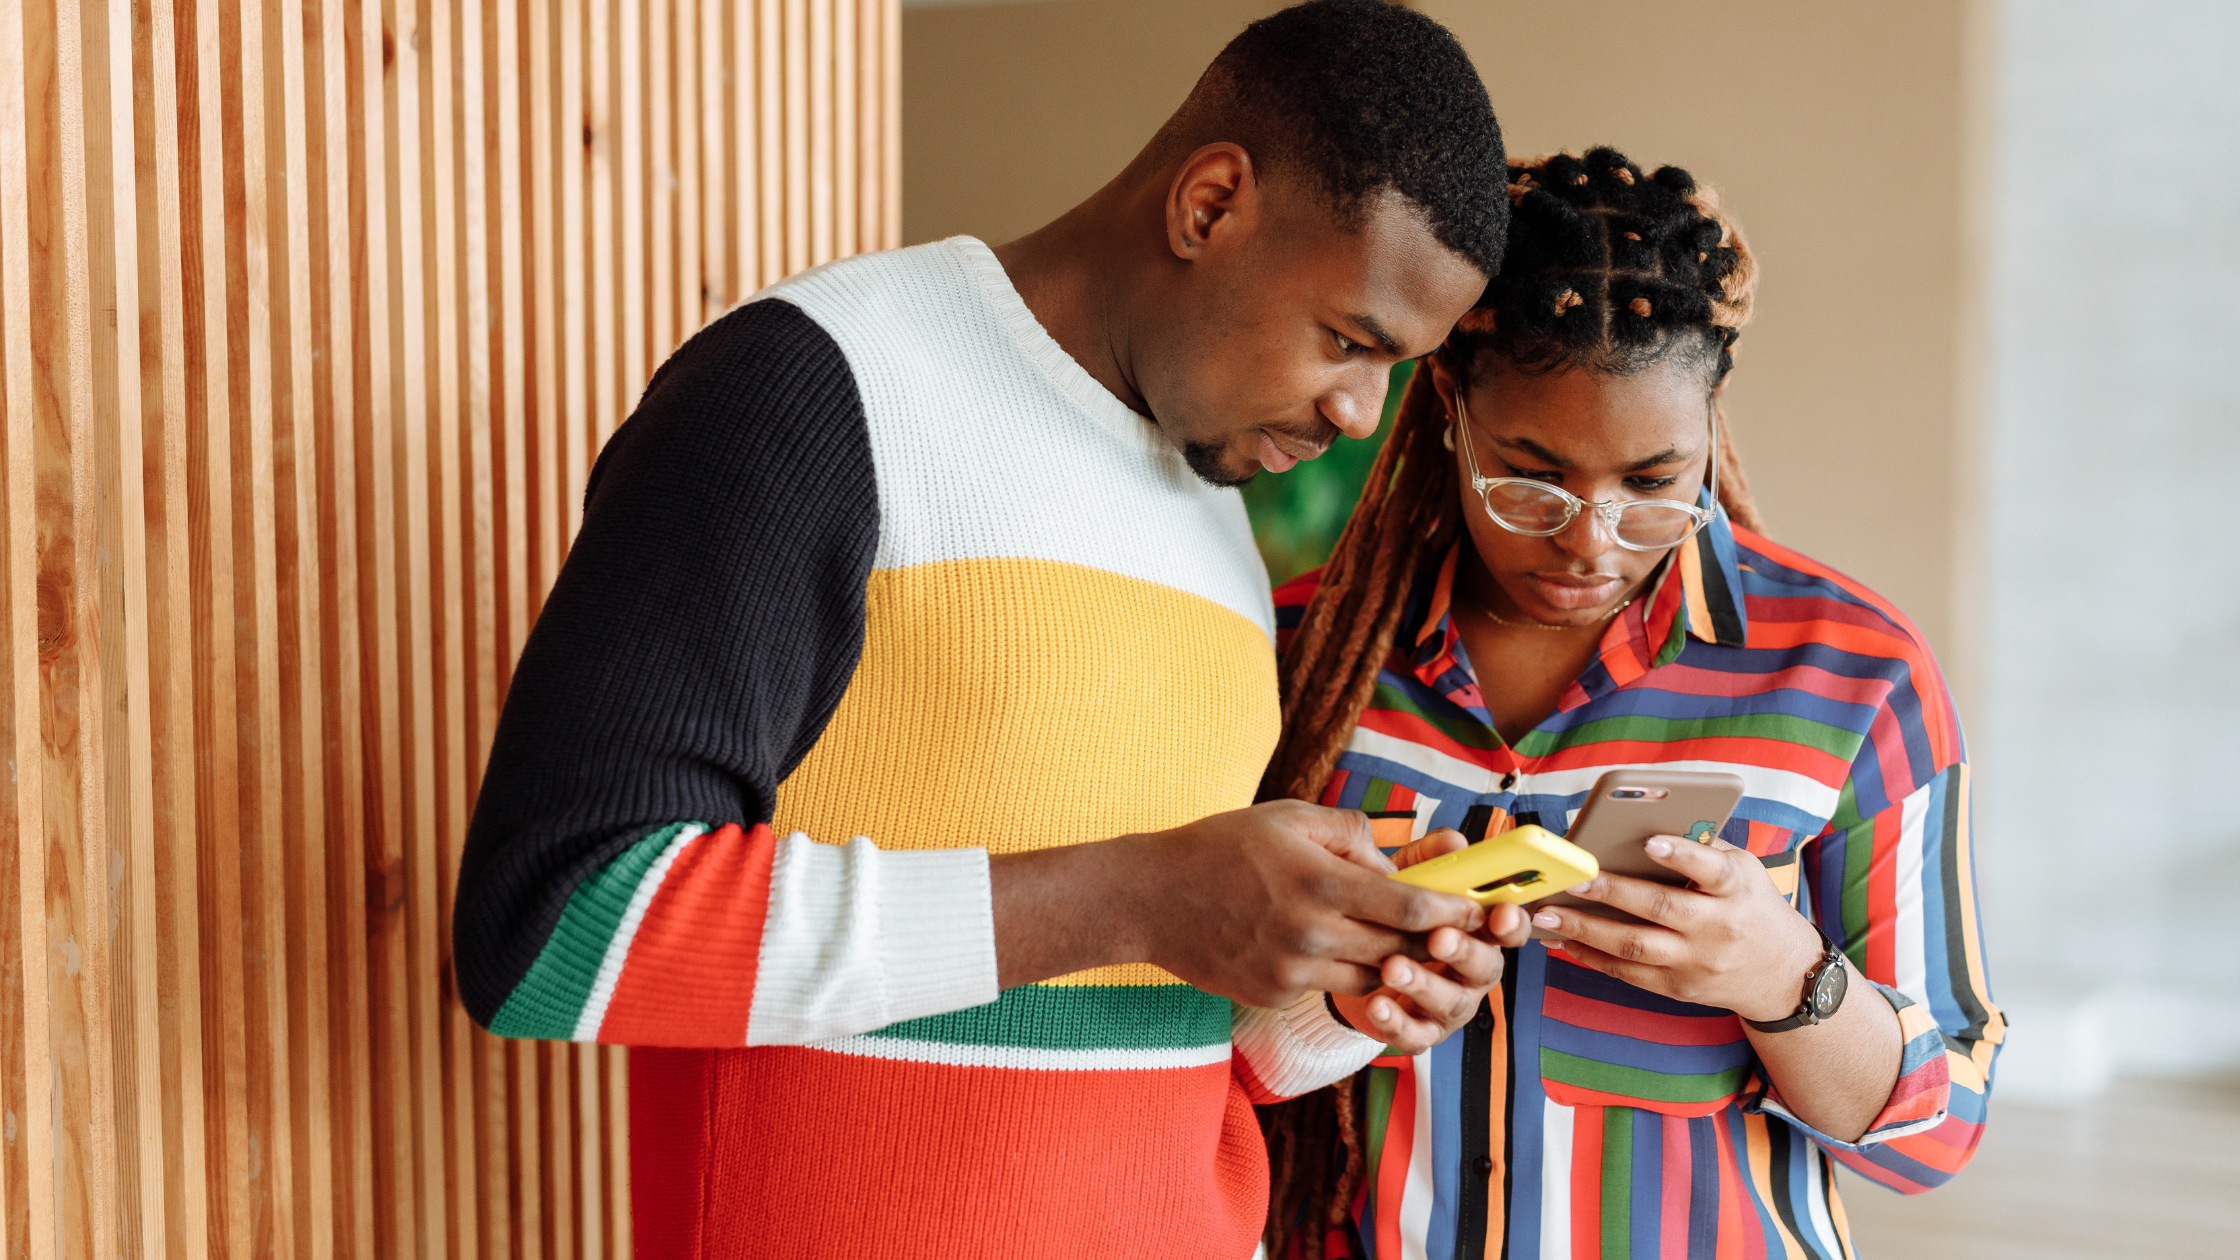 Photo of a man in a knitted sweater and a woman in a colourful shirt using their mobile phones